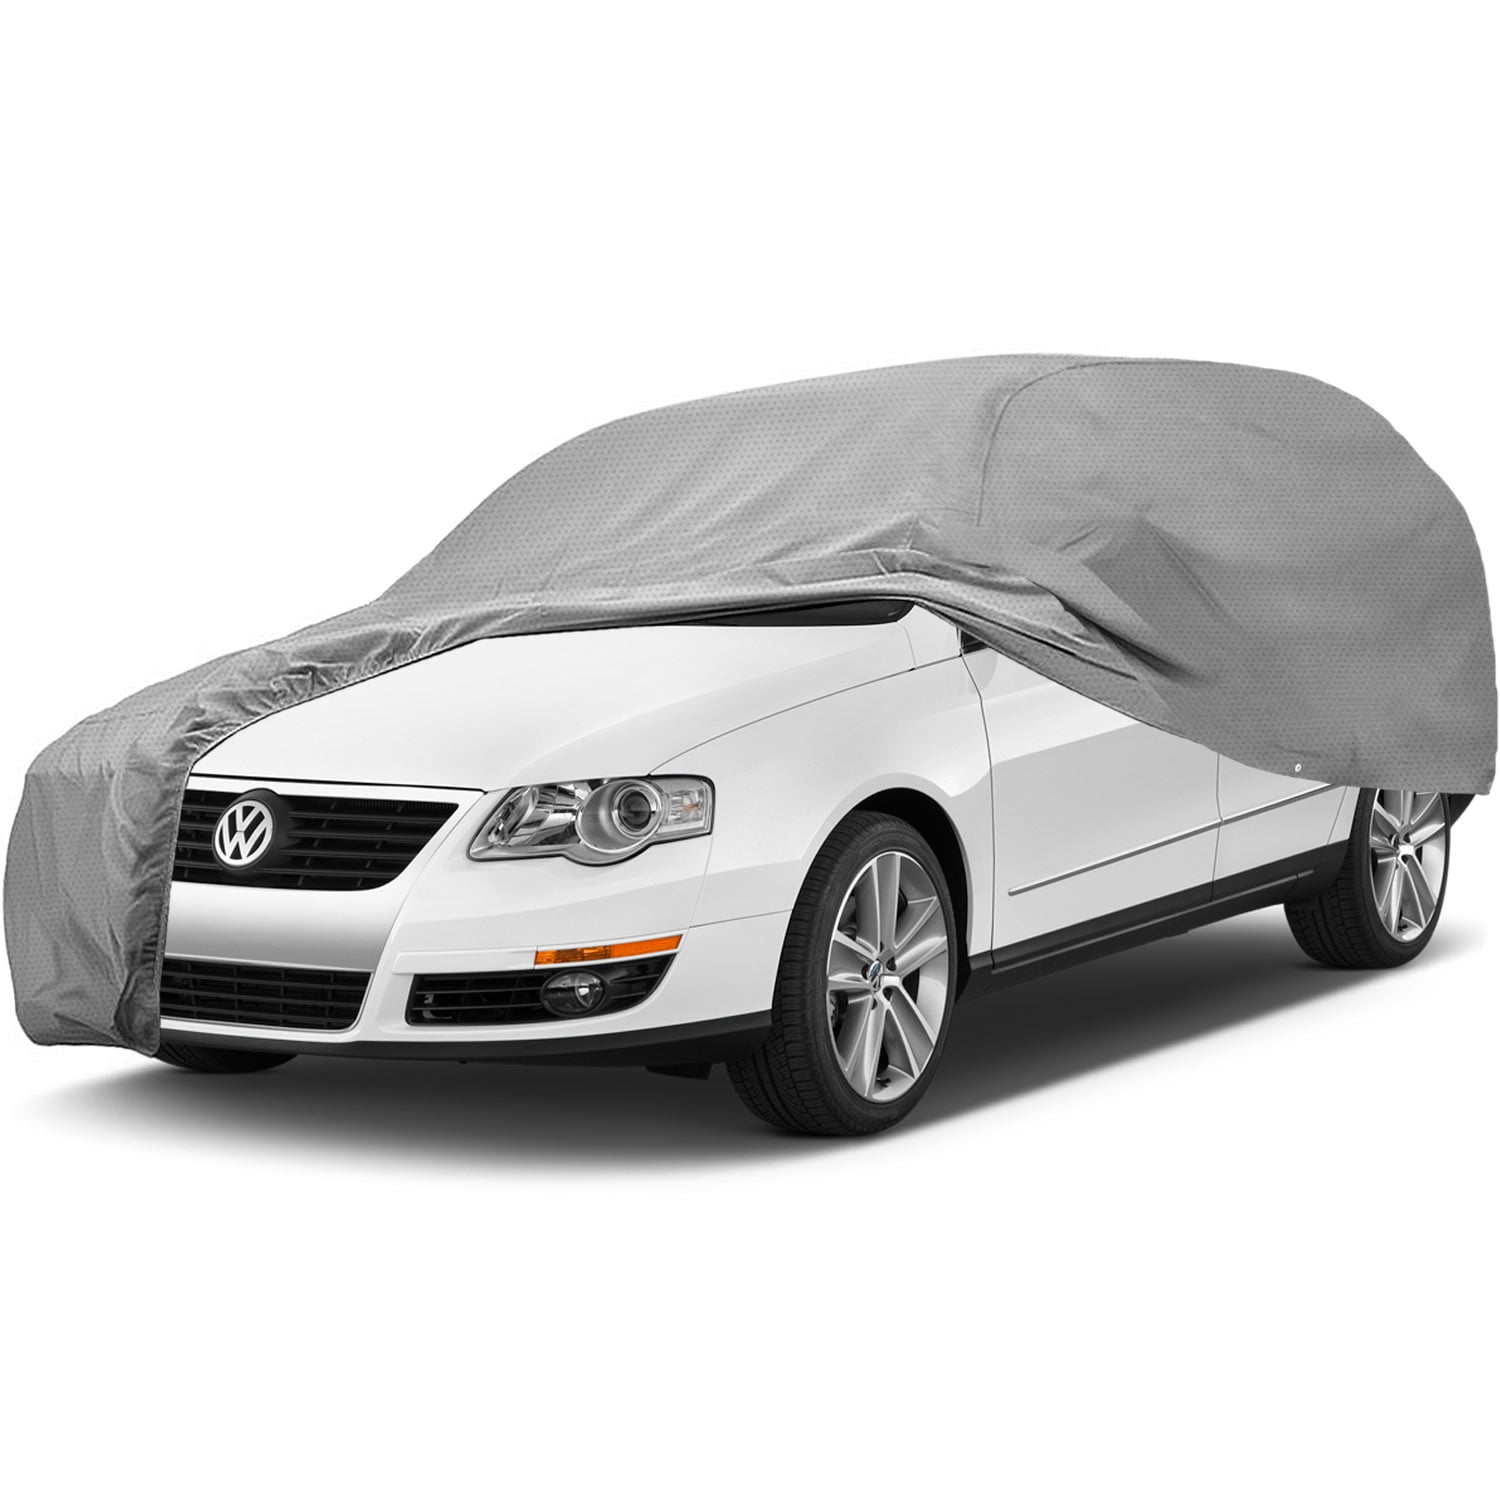 North East Harbor Superior Sedan Car Cover Gray Color Fits Sedan Cars up to 14 2 Length 170 x 60 x 48 Waterproof All Weather Full Exterior Covers Breathable Outdoor Indoor